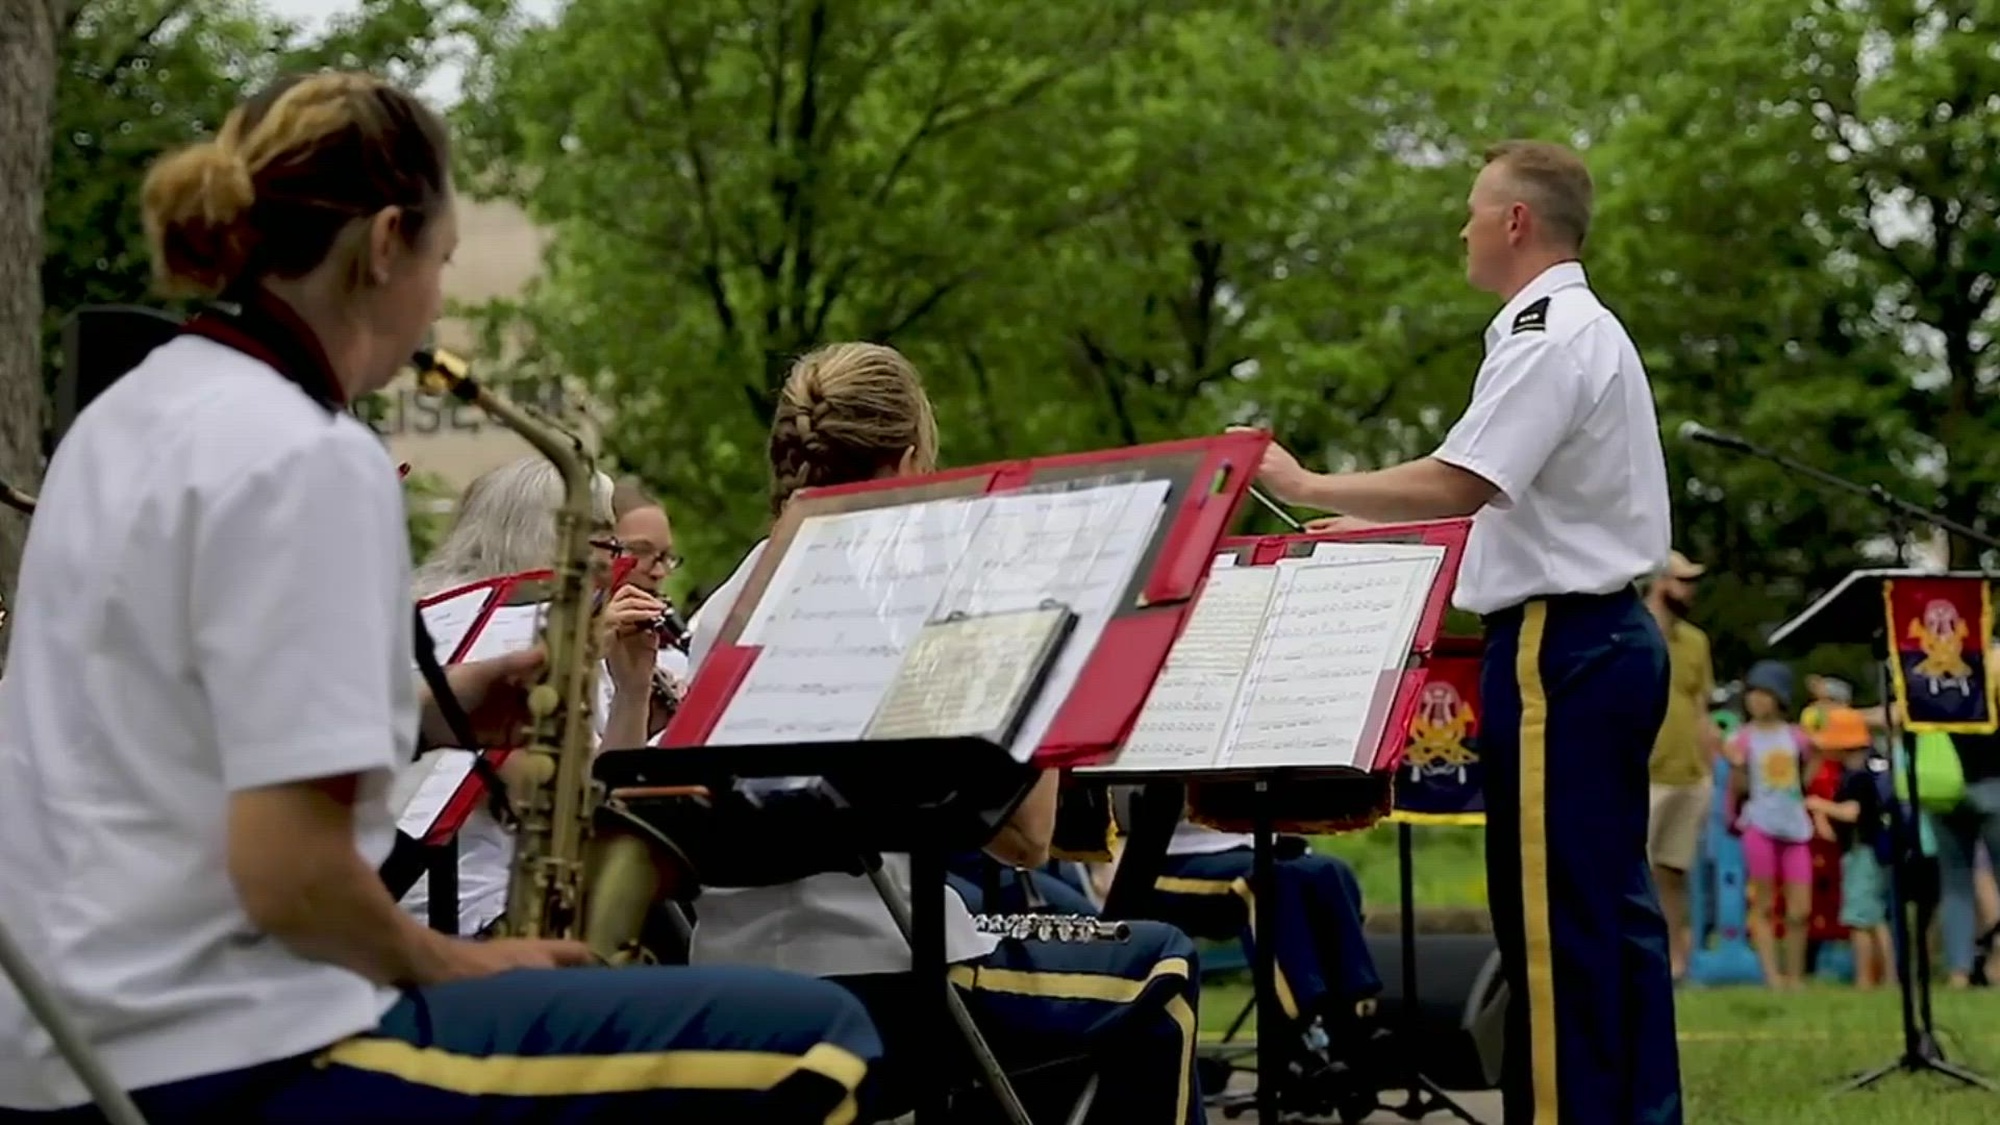 Army Reserve Soldier/musicians from the 88th Readiness Division highlight the value and benefit of being a member of an Army Reserve Band. (U.S. Army Reserve video by Zach Mott, 88th Readiness Division)